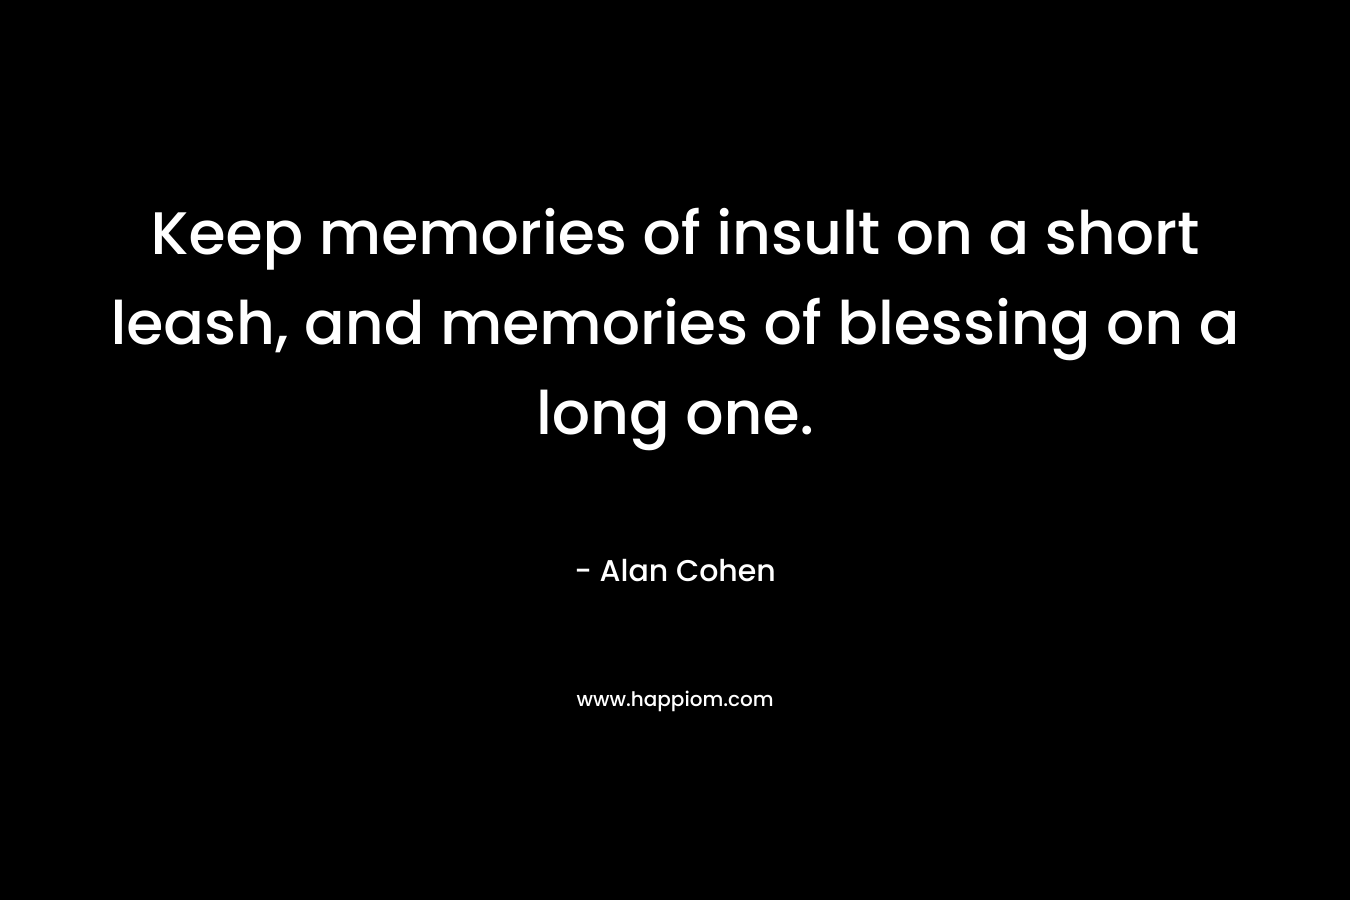 Keep memories of insult on a short leash, and memories of blessing on a long one. – Alan Cohen